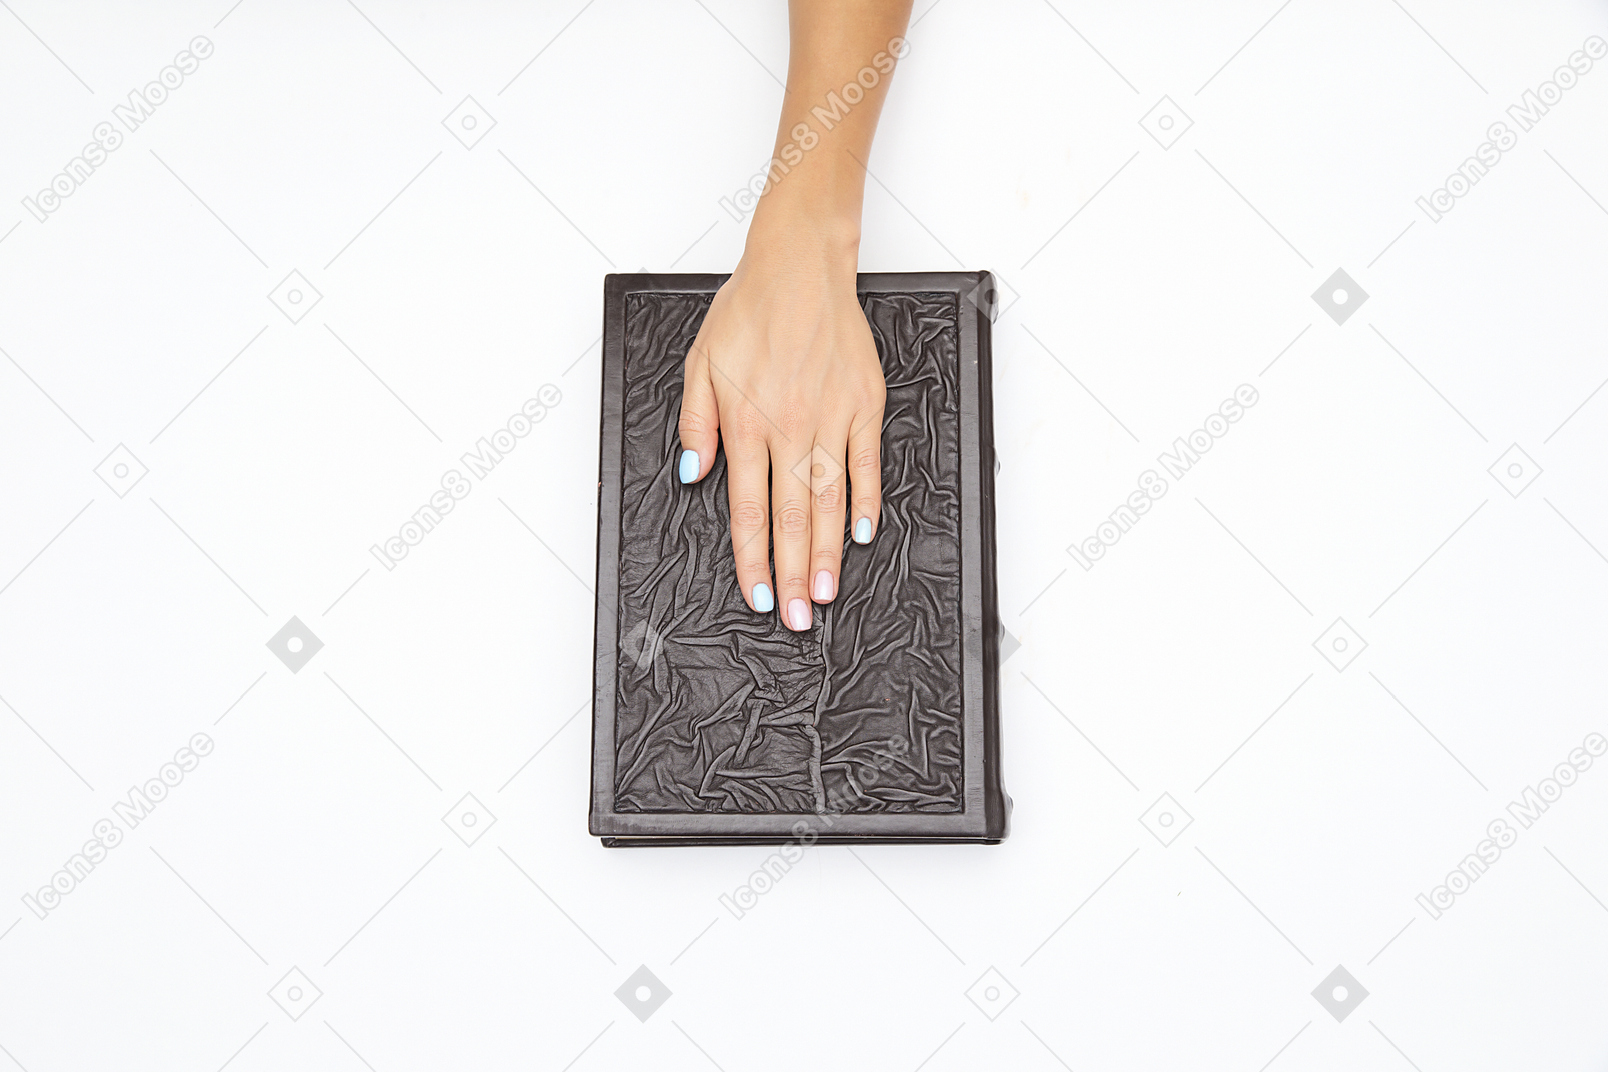 Female hands holding a black book